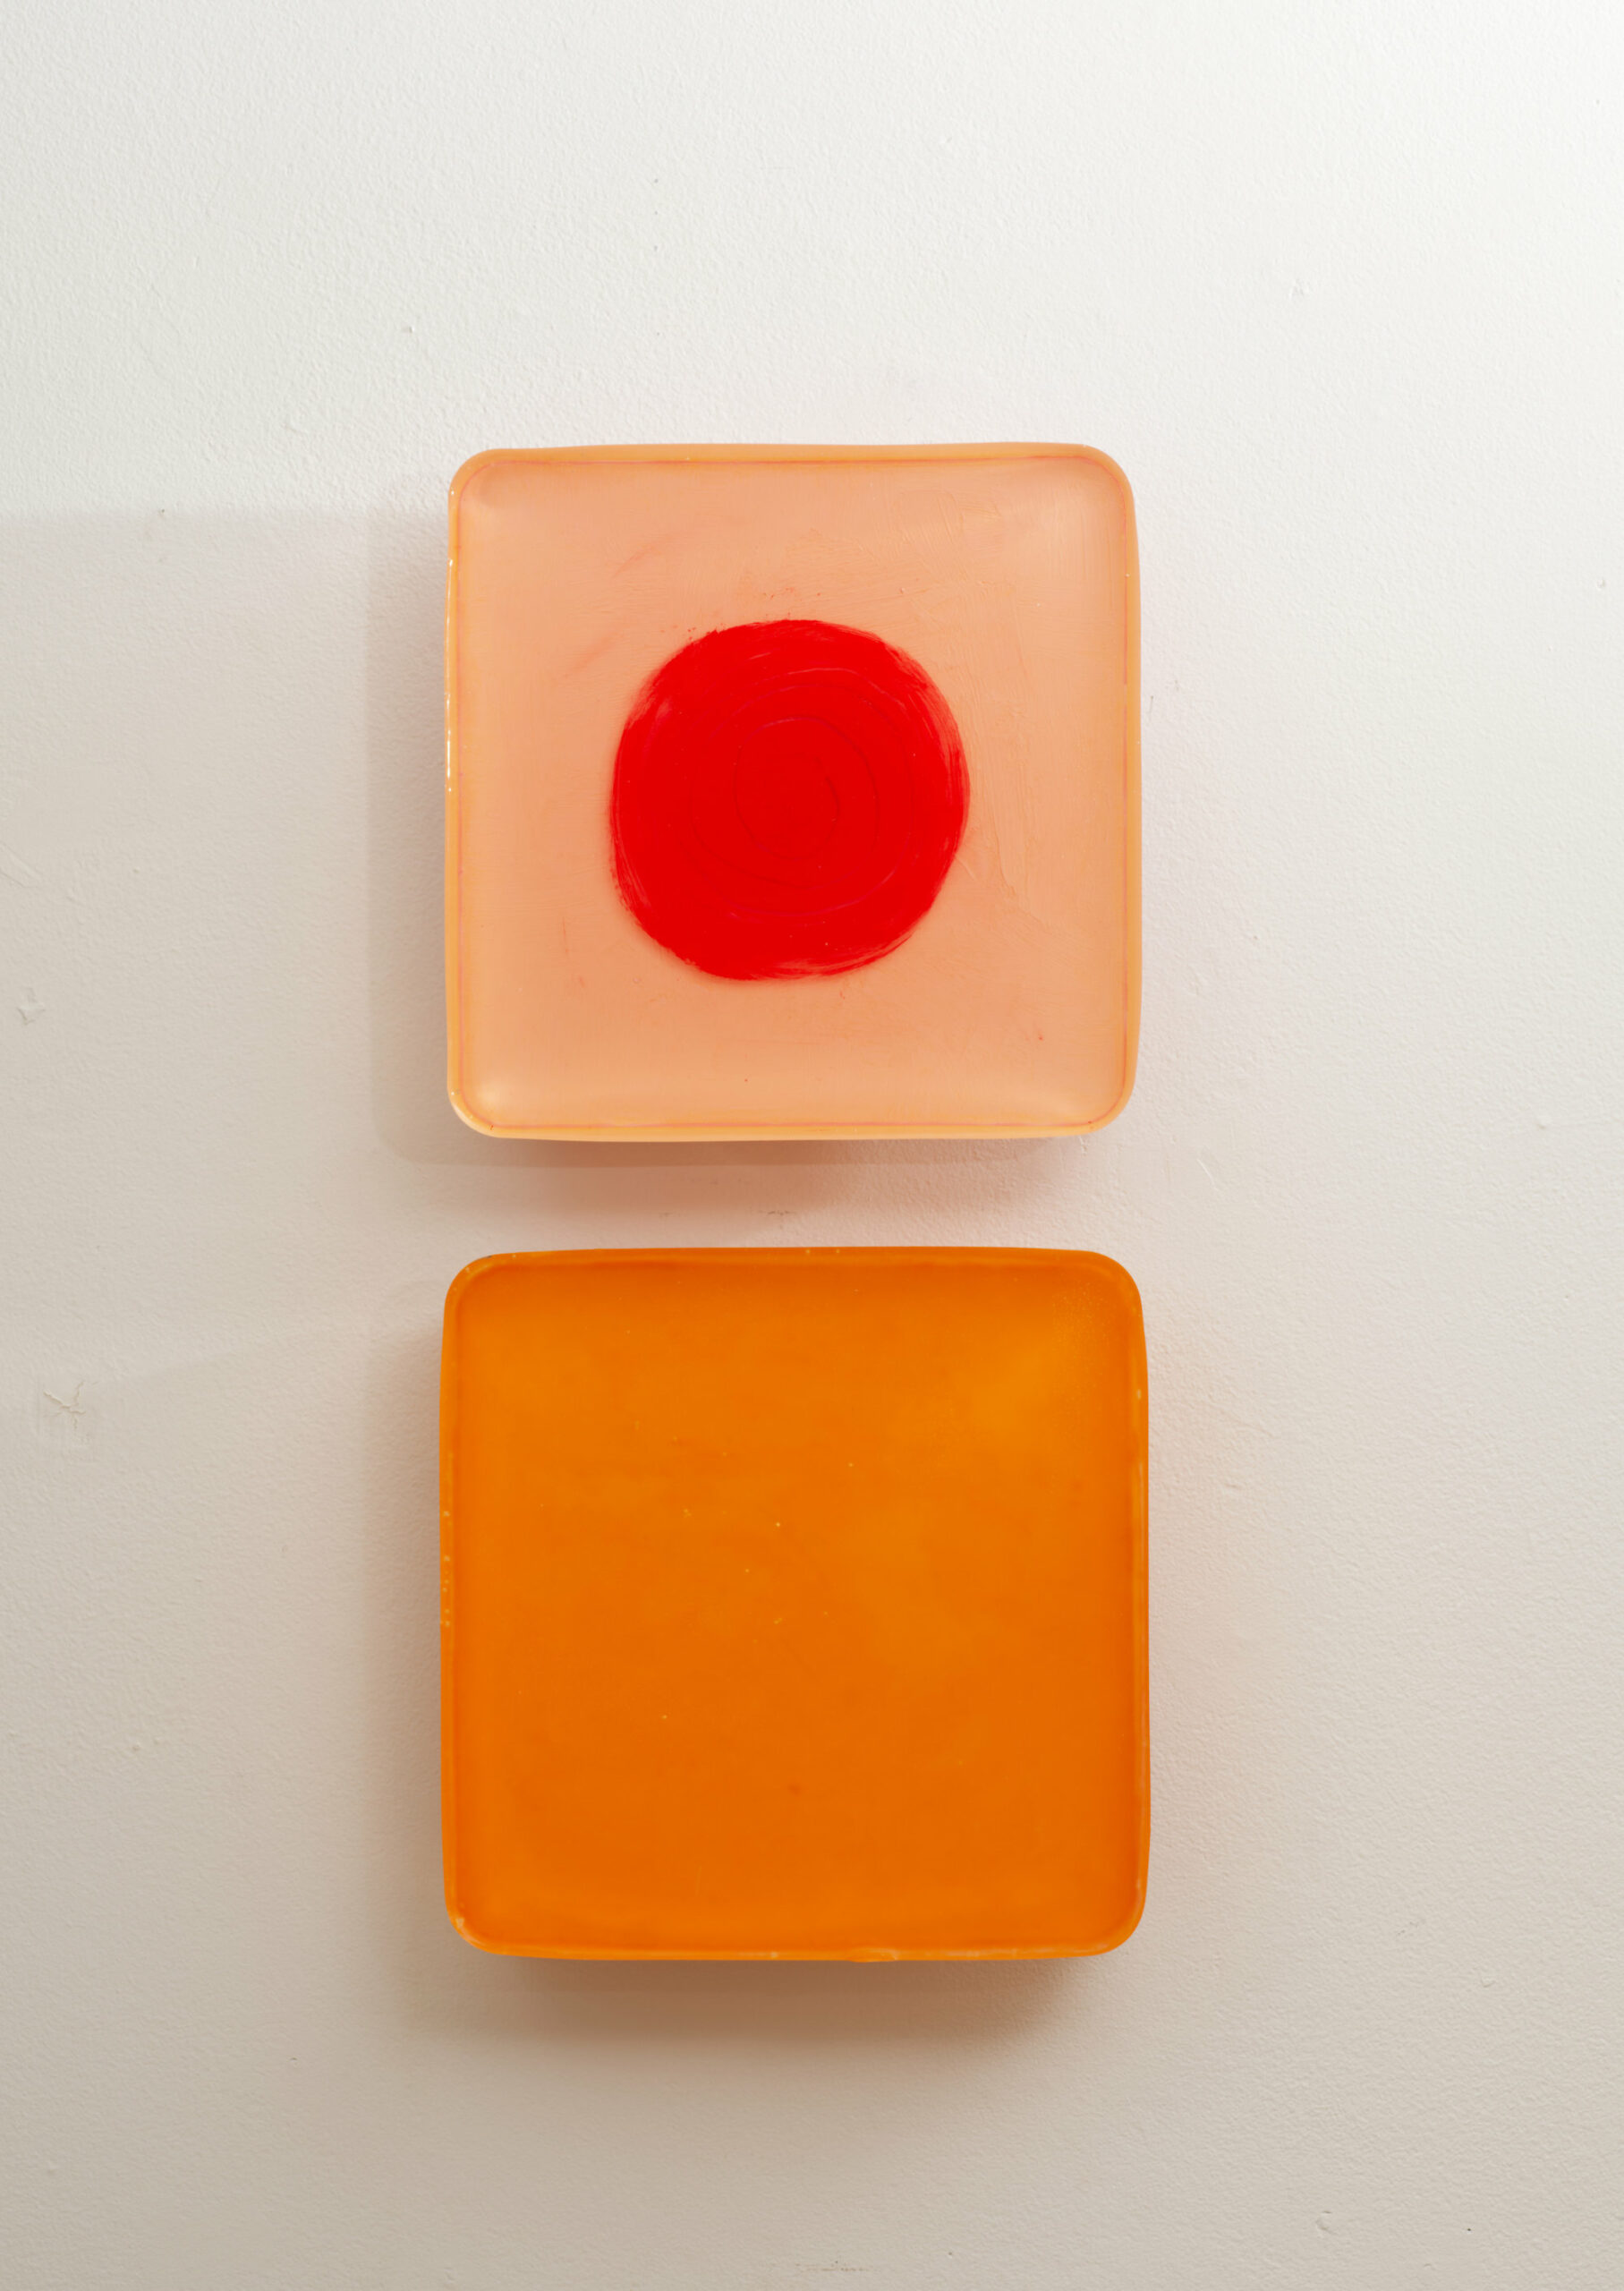 Resin Work titled "On Orange" By Ana Rendich Les Yeux du Monde